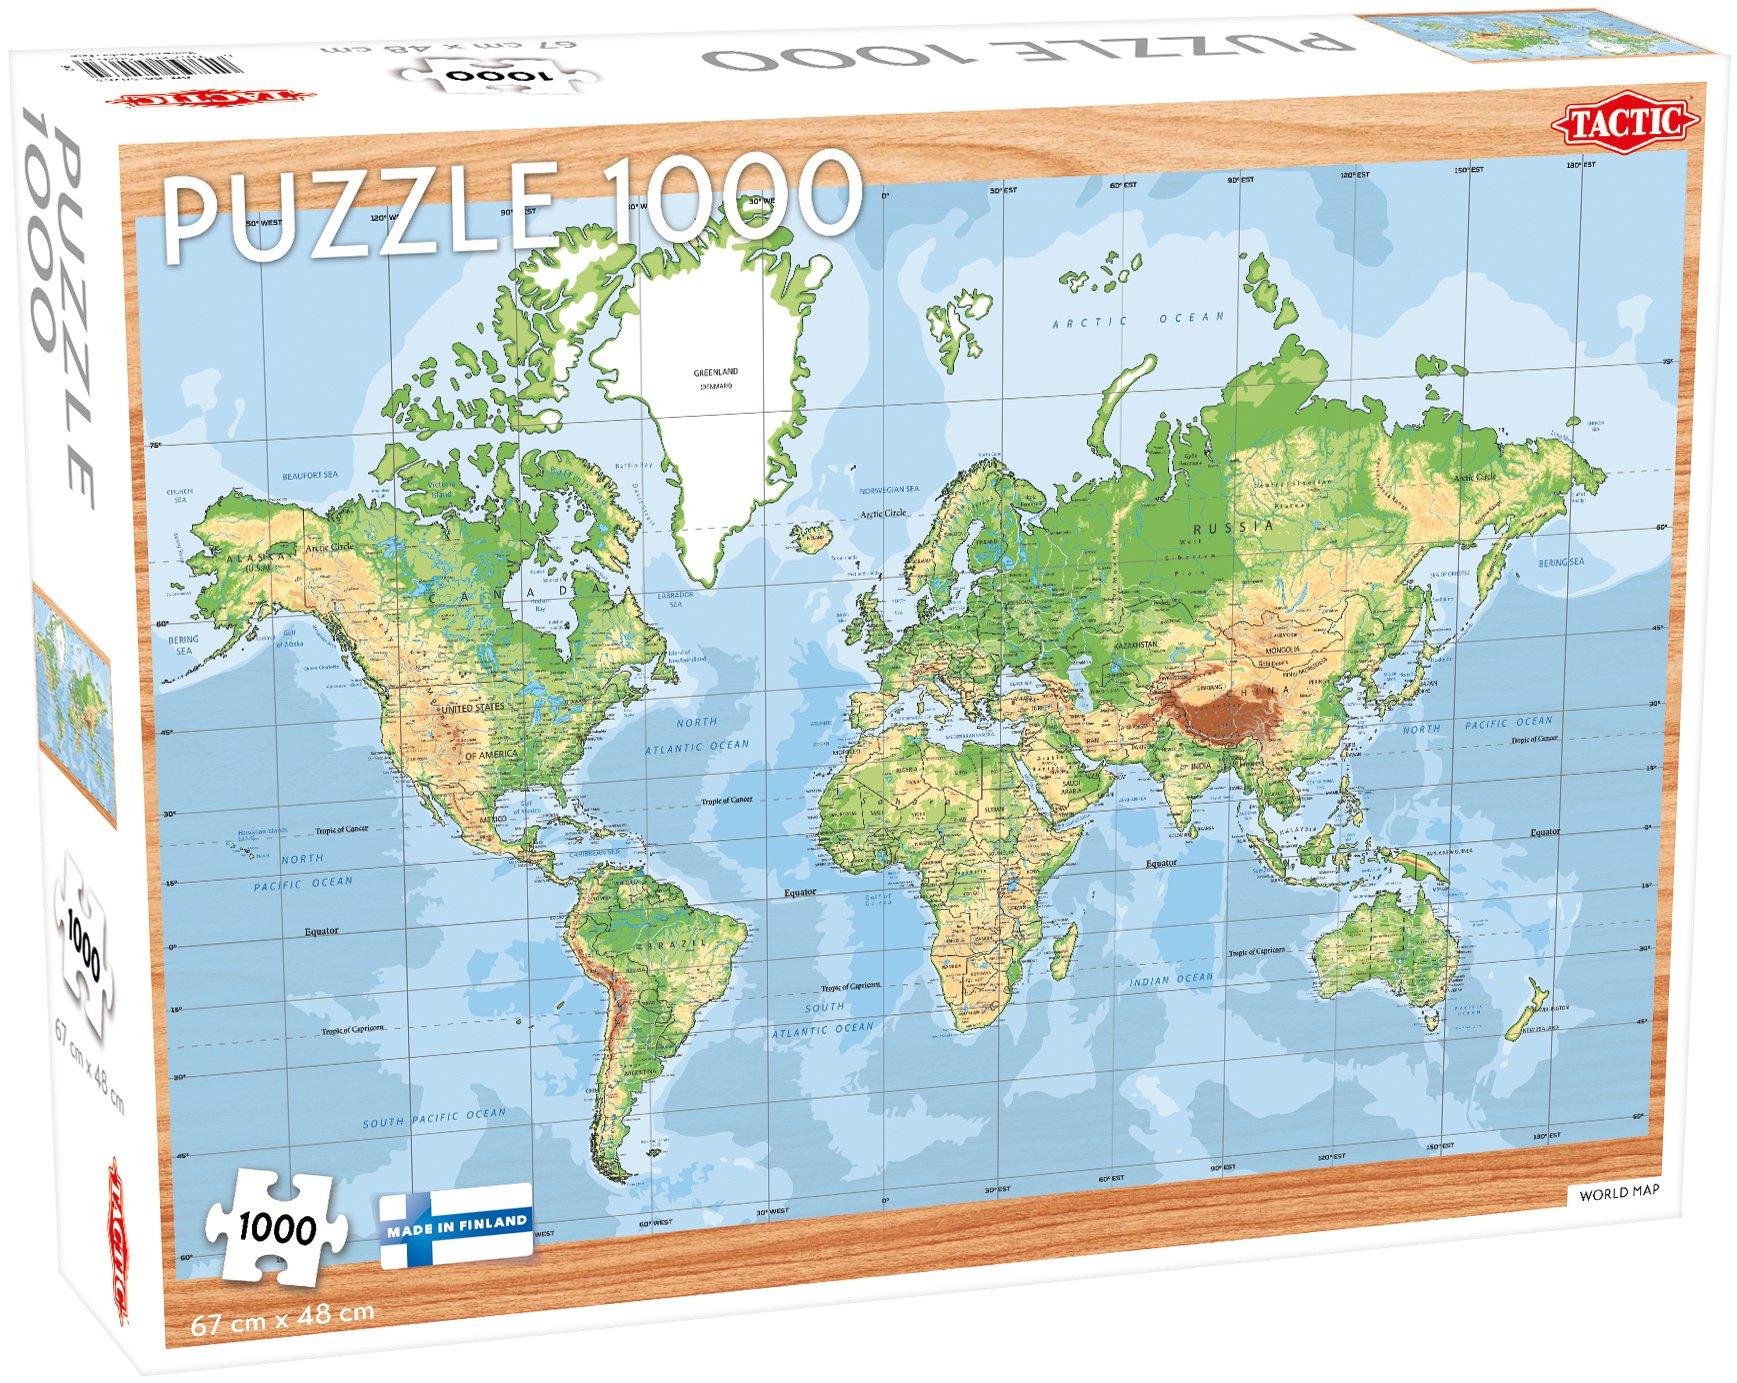 1000 Piece Jigsaw Puzzles - The Most Popular Category in Jigsaw Puzzles!  Special Offers